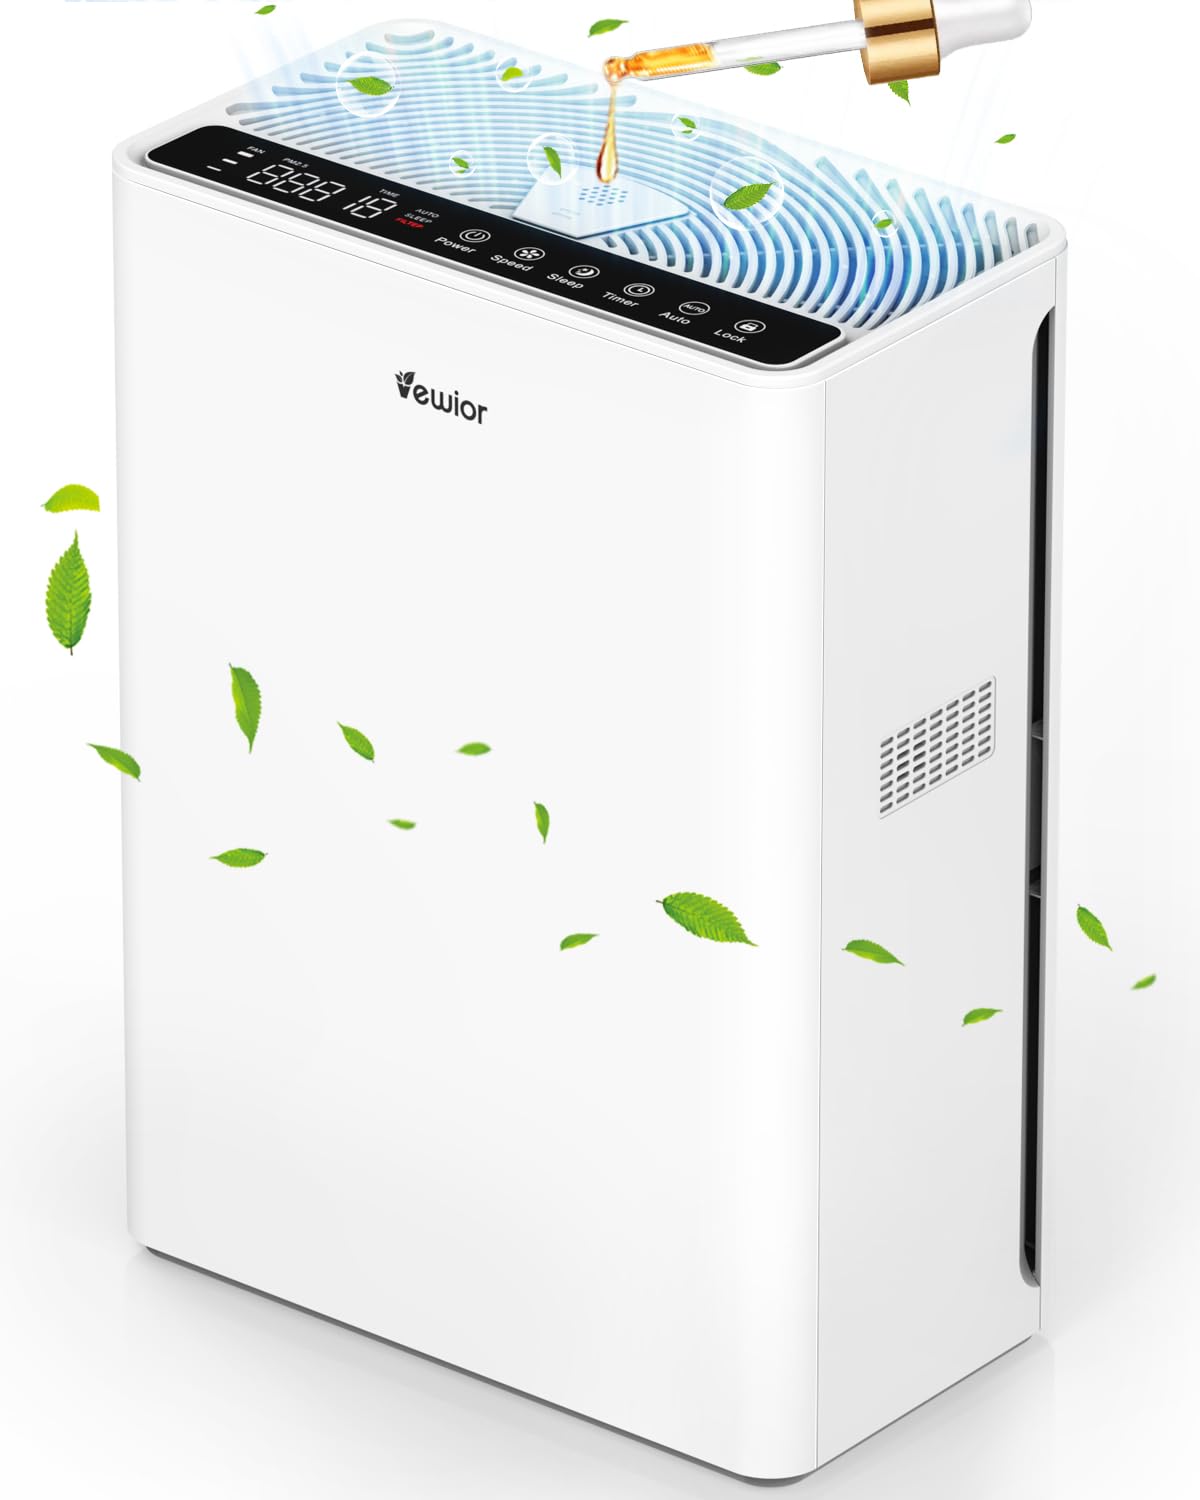 VEWIOR Air Purifiers For Home Large Room Up To 1730 sqf...